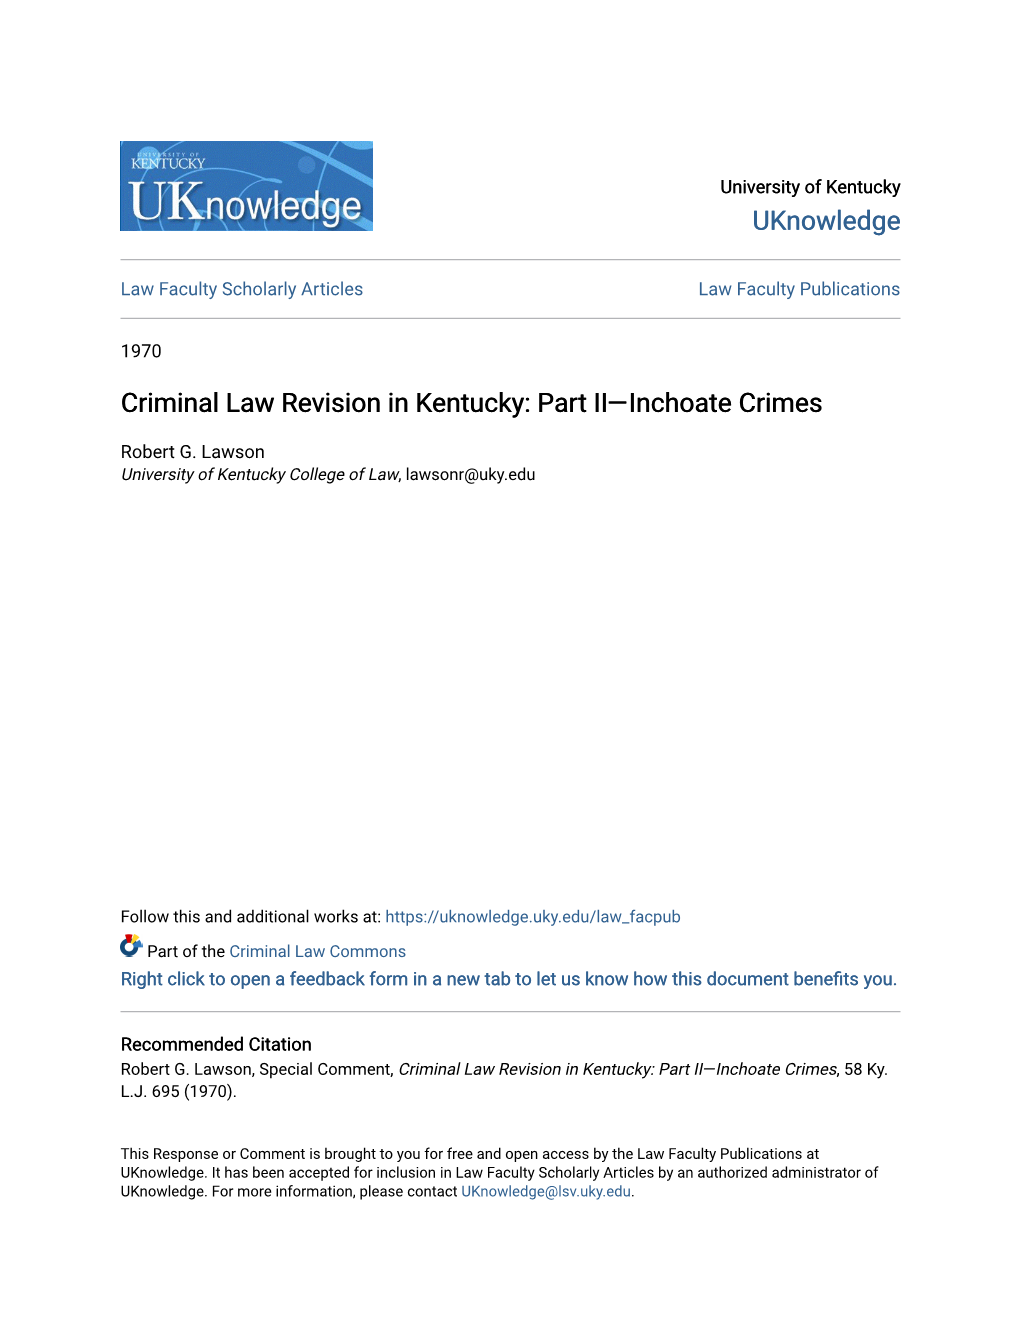 Criminal Law Revision in Kentucky: Part II—Inchoate Crimes